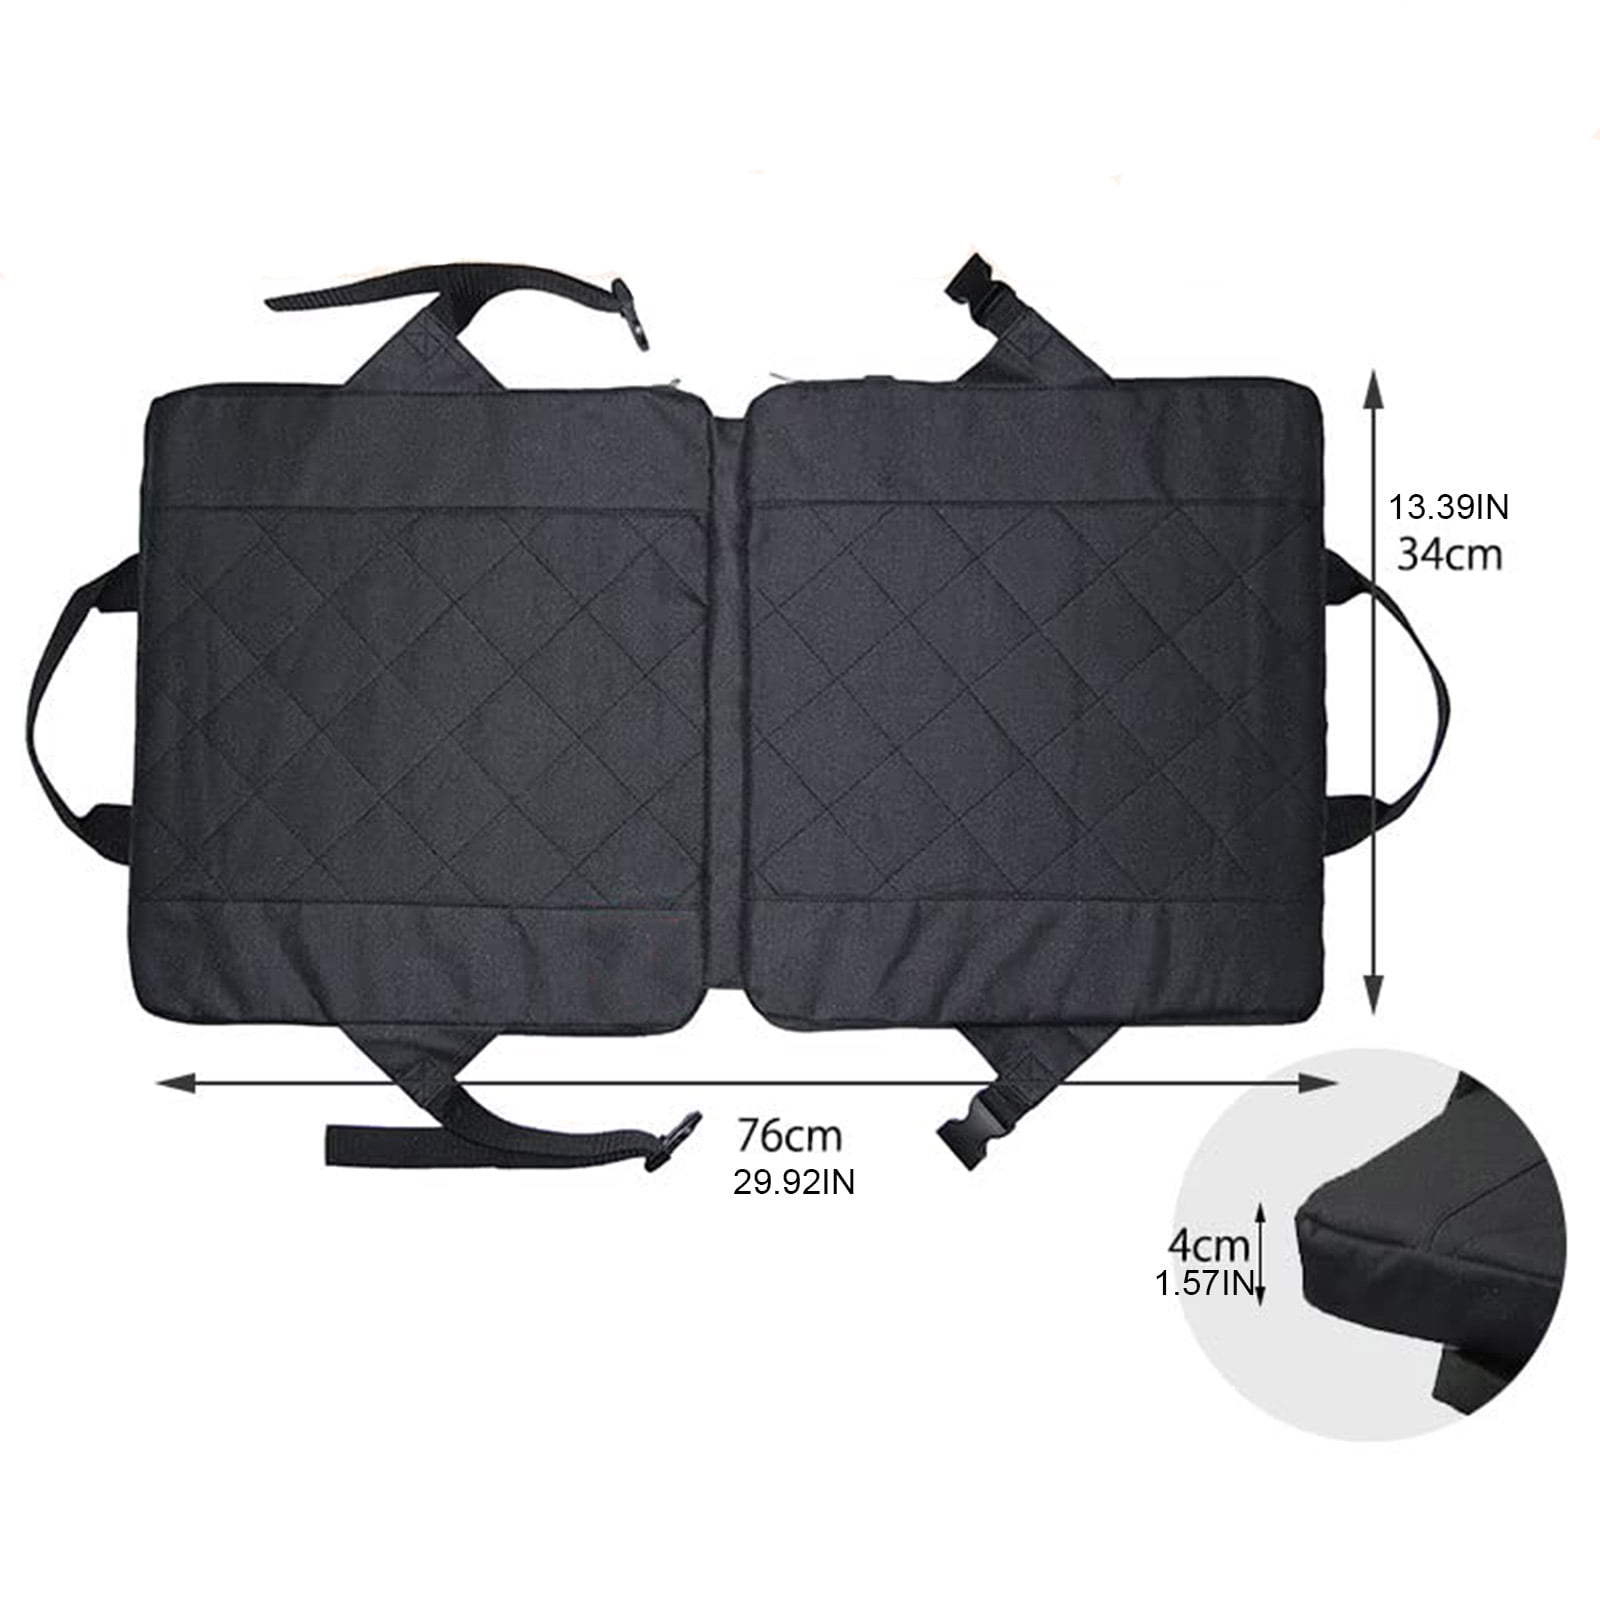 CONQUECO Portable Heating Pad Stadium Seat Cushion for Bleachers - Electric  Warmer Mat with 3 Heat Setting for Outdoor Sports Camping Travel (Power